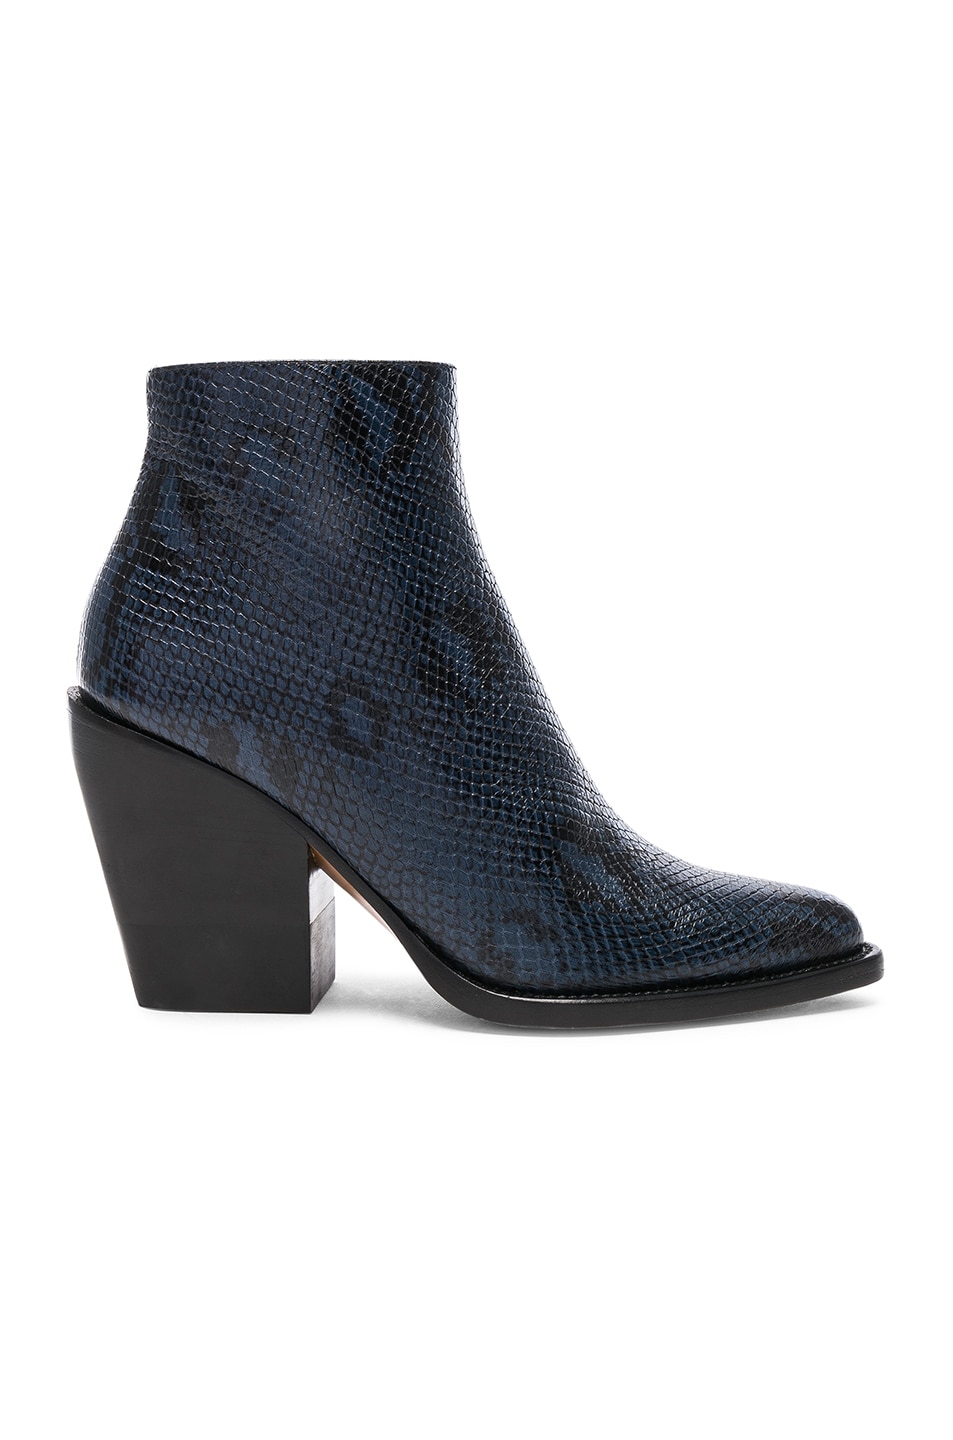 Image 1 of Chloe Rylee Python Print Leather Ankle Boots in Navy Ink